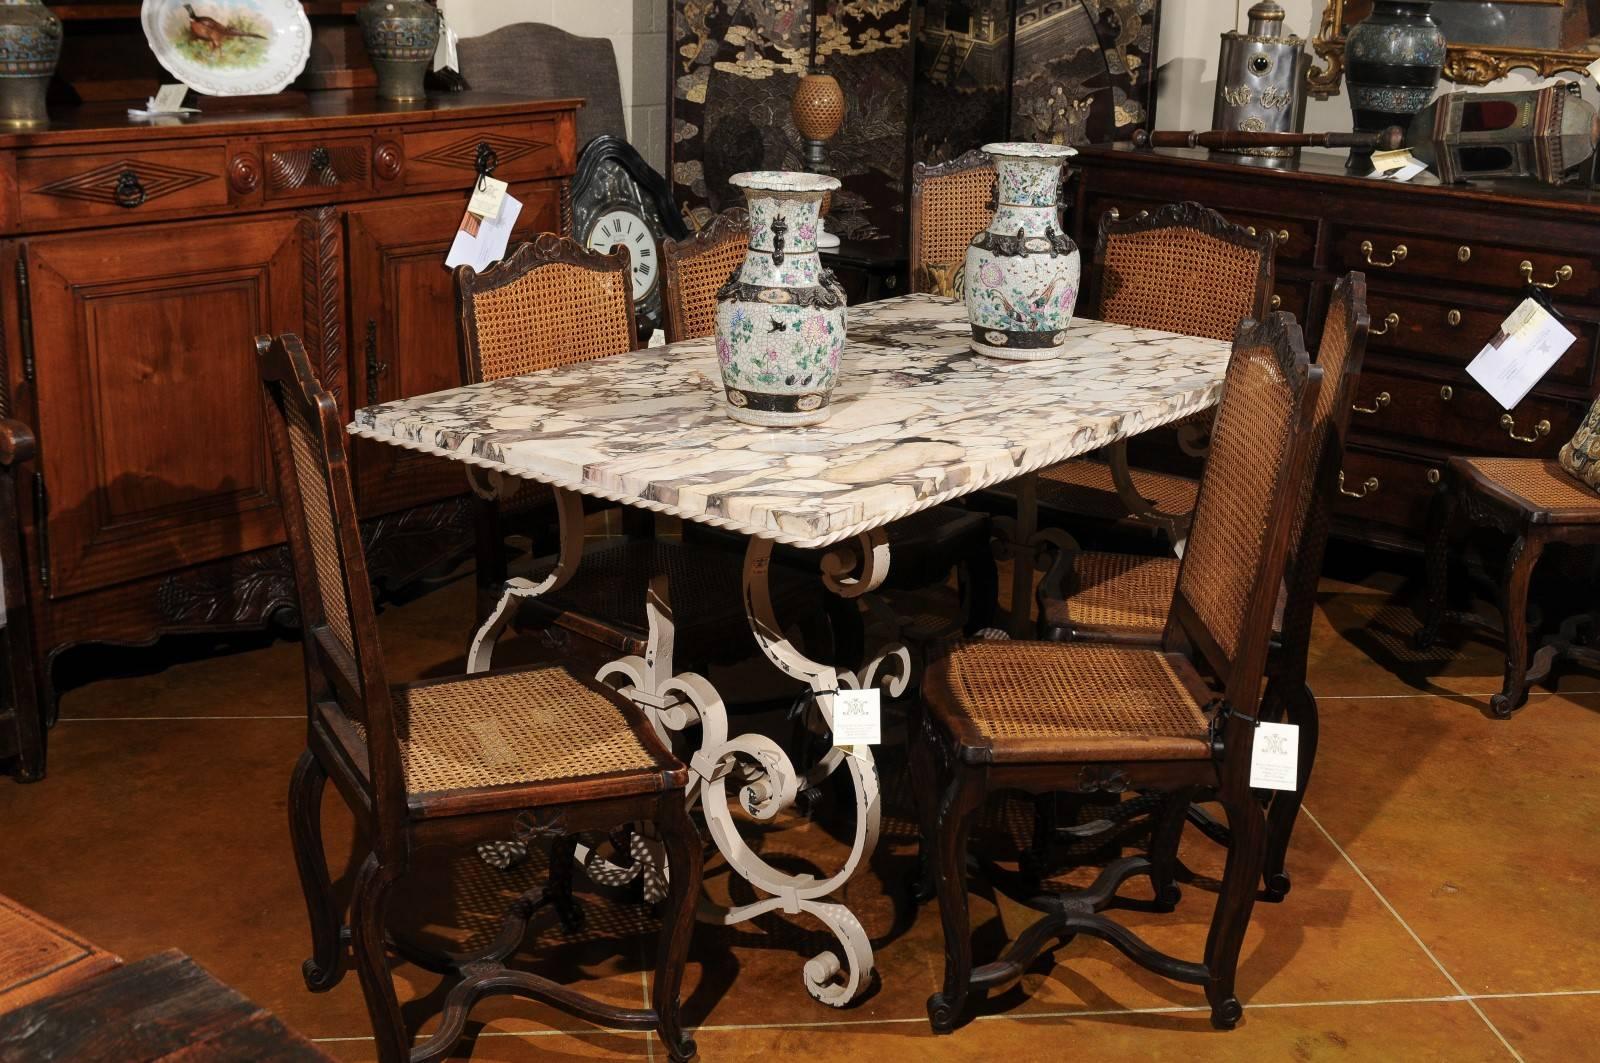 Iron garden/outdoor dining table in distressed white-pained finish with scroll detail and stretcher. A twisted border surrounds the rectangular marble top in variegated hues of whites, grays, and purples. The table dates from 20th century, France.